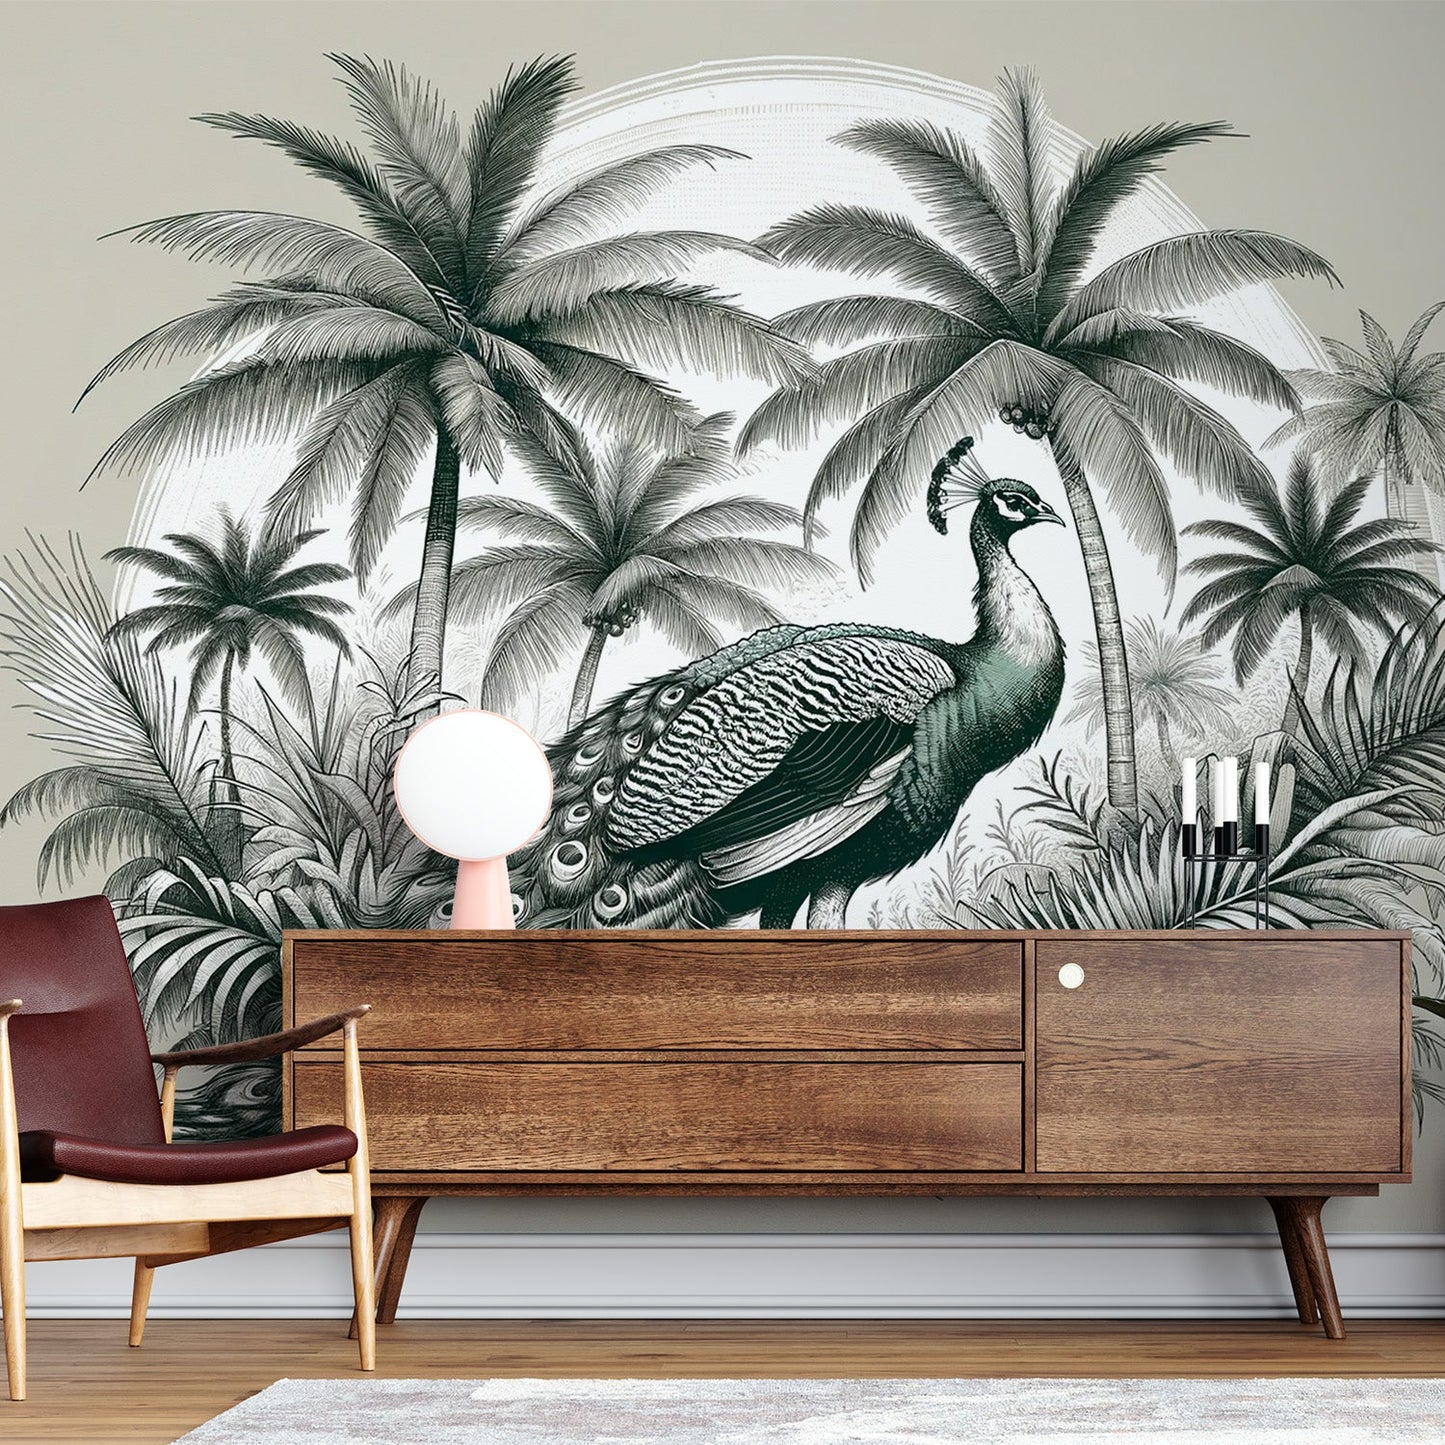 Peacock Wallpaper | Neutral Tones with Palm Trees